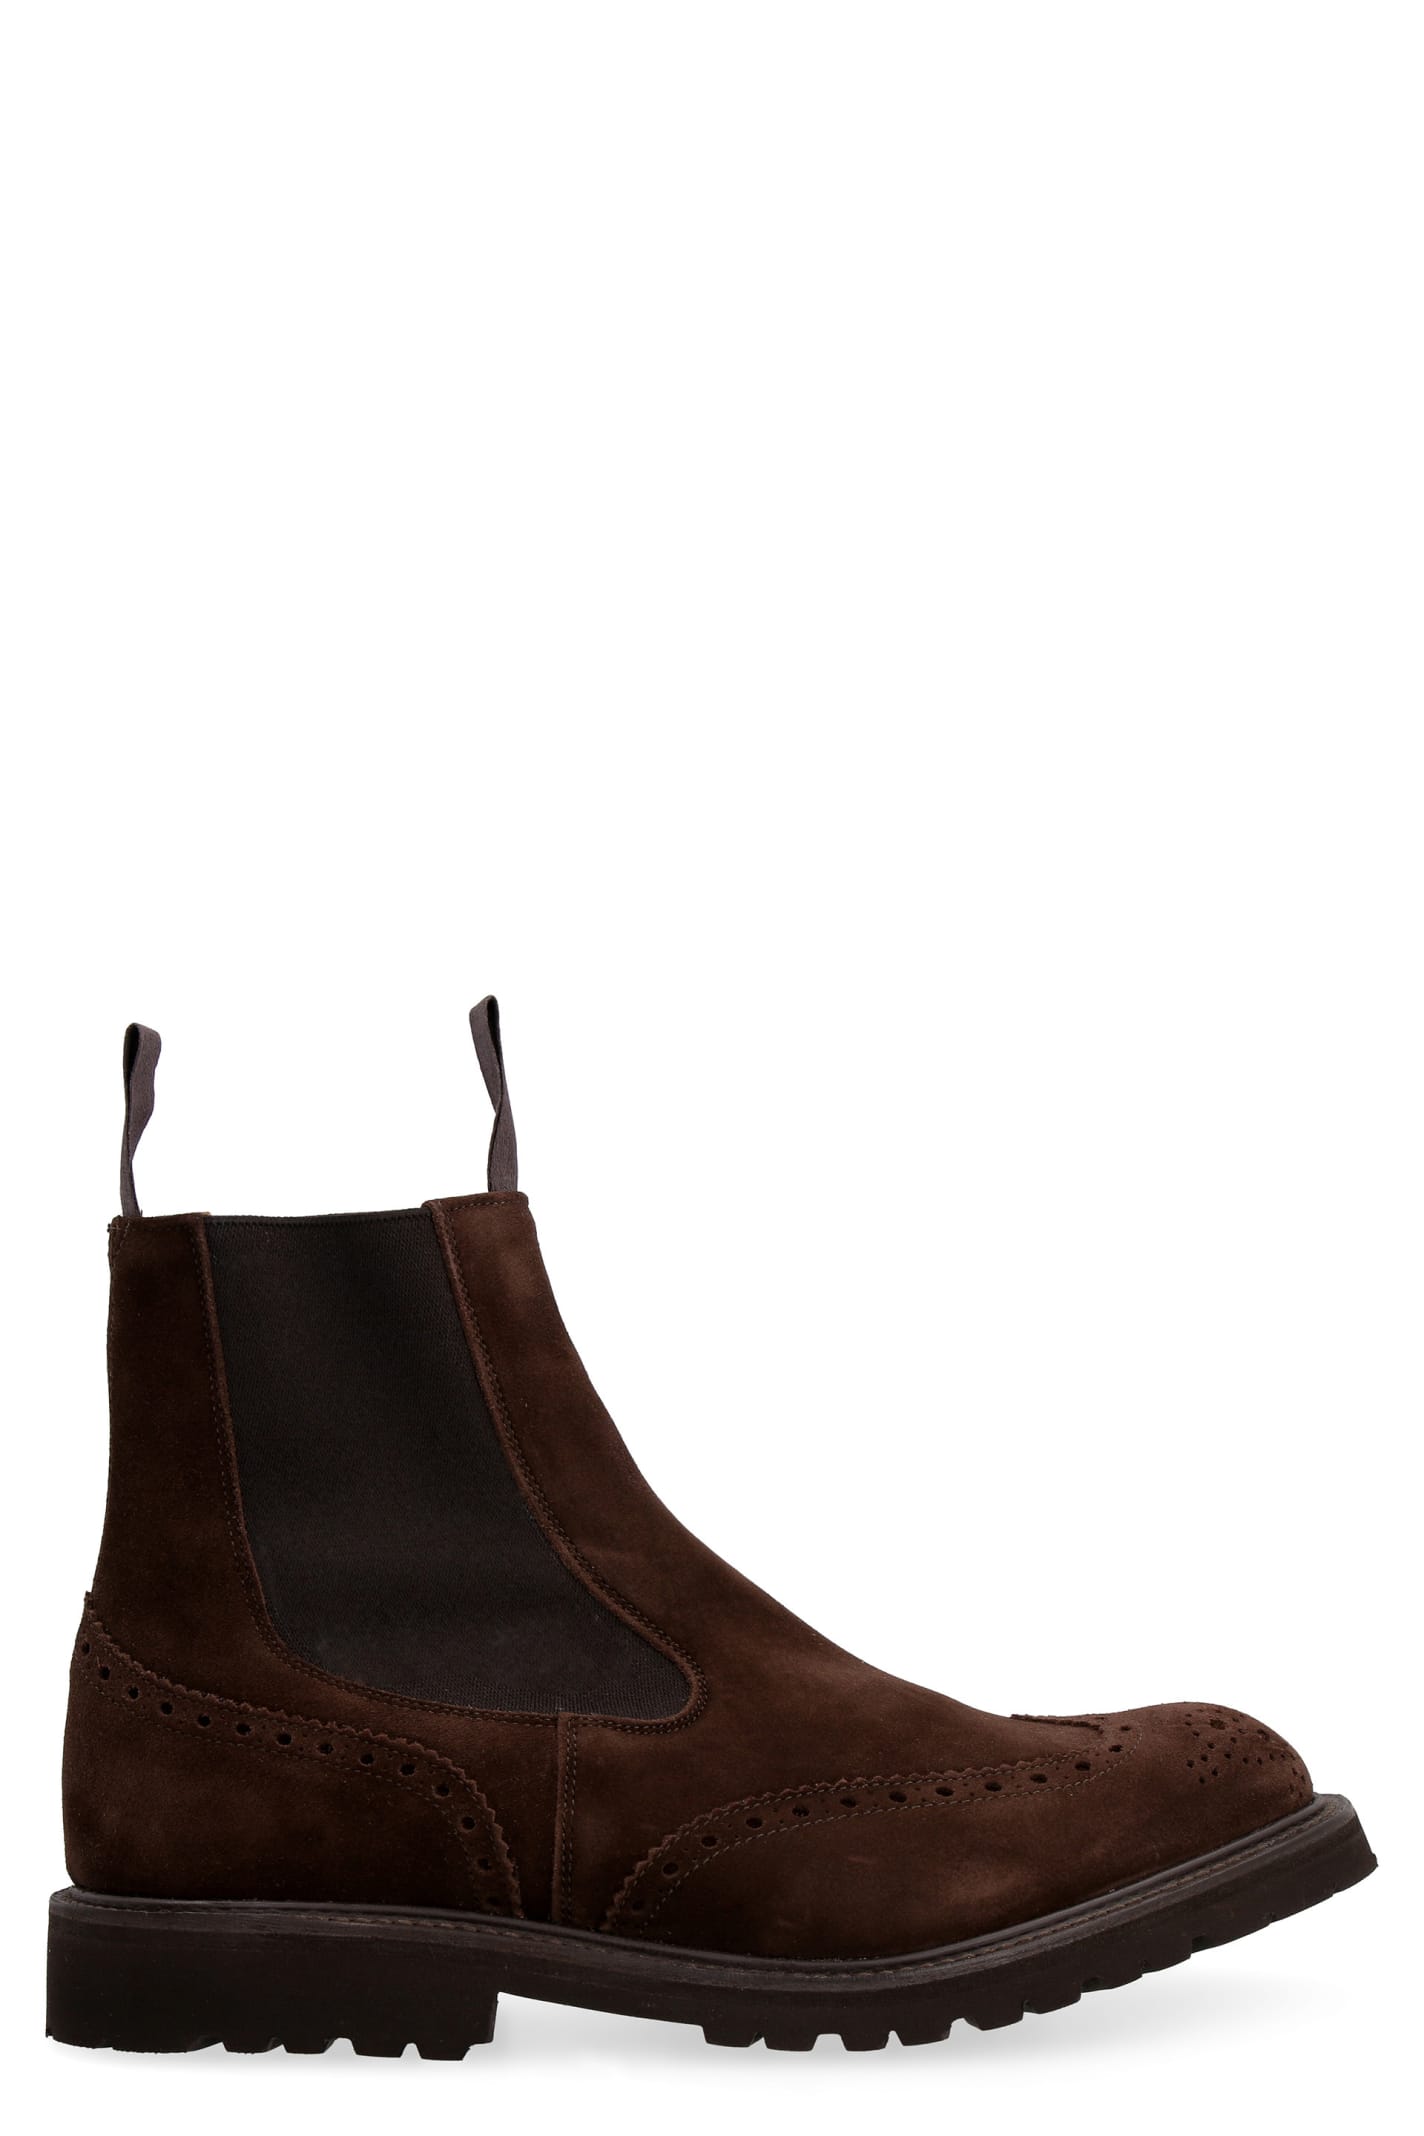 TRICKER'S HENRY SUEDE CHELSEA BOOTS,275431 CAFFEREPELLO